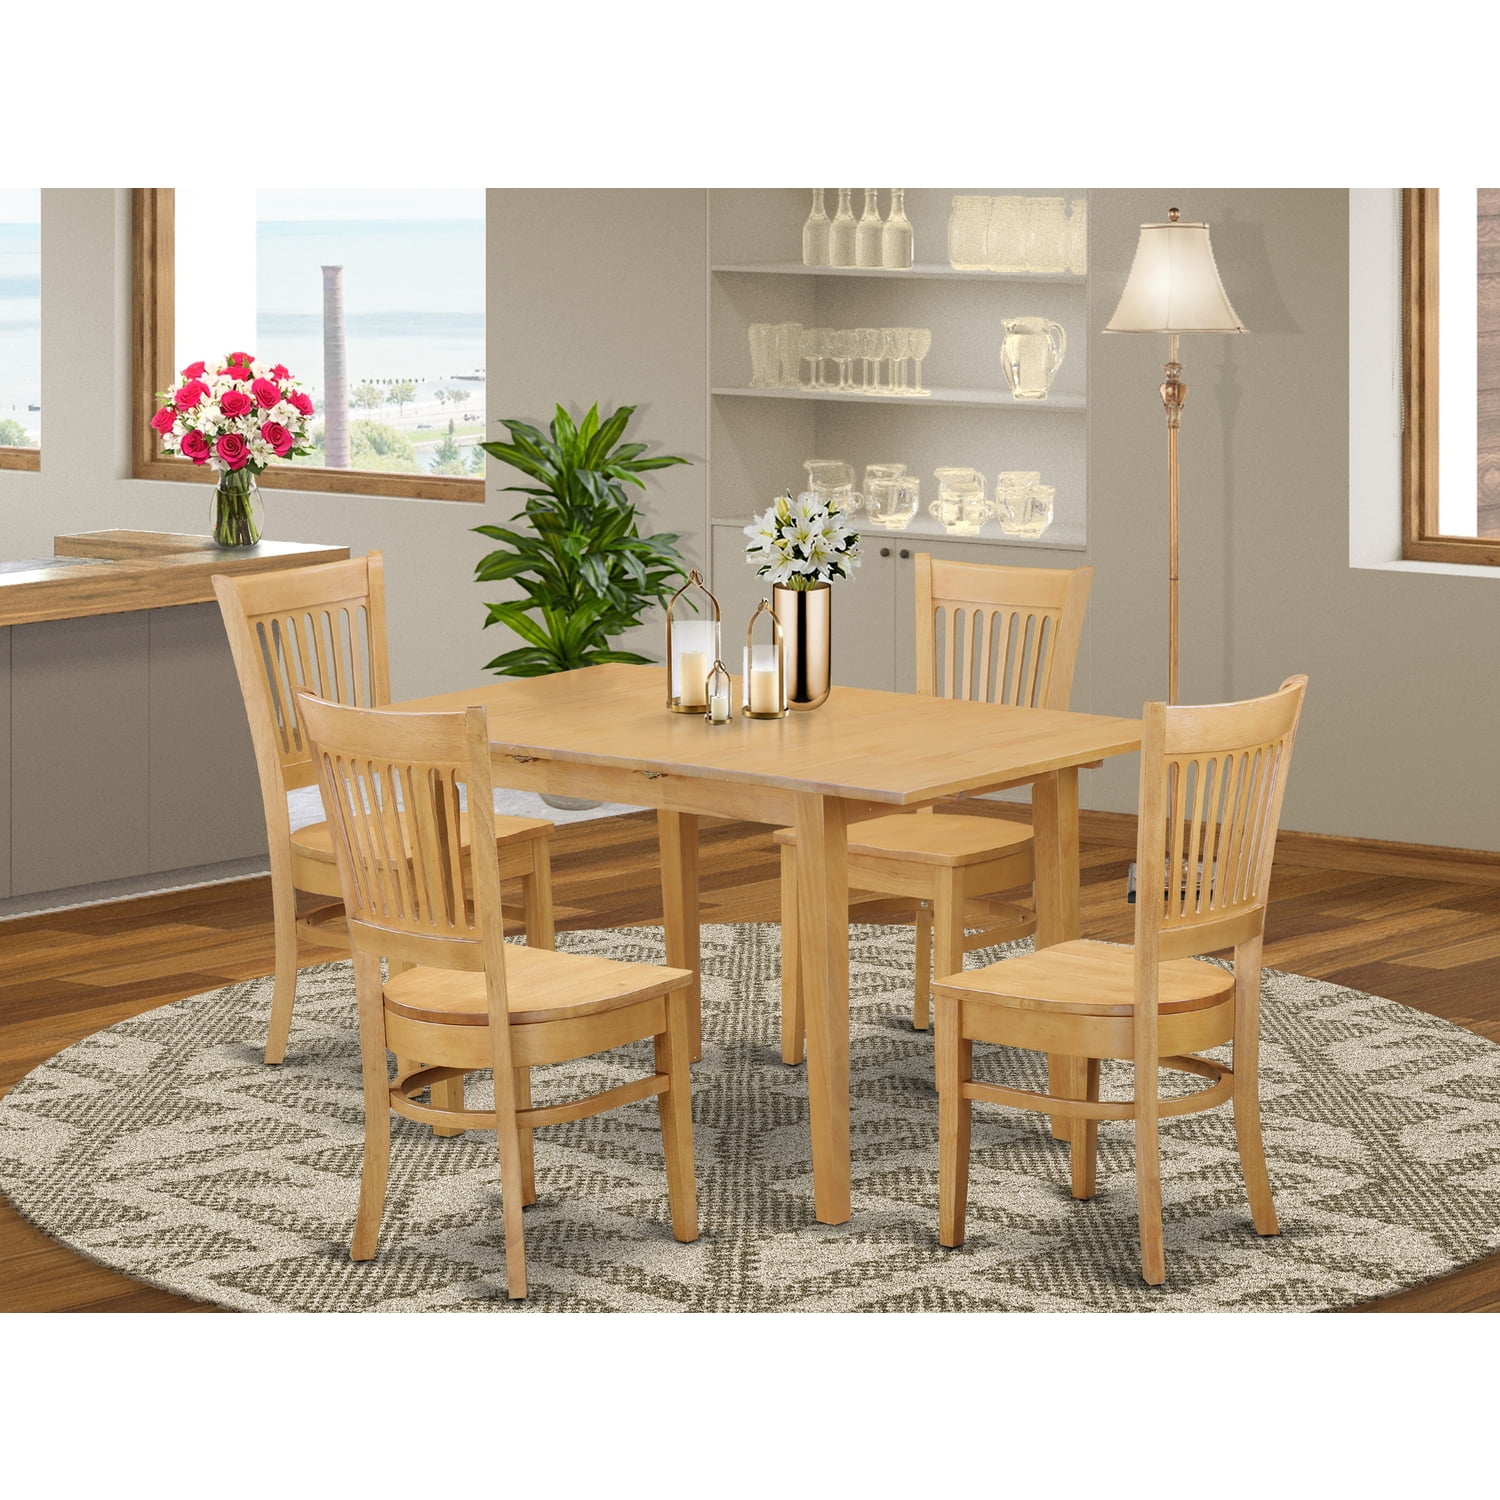 NOVA5-OAK-W 5 Pc Dining room set - Dining Table and 4 Dining Chairs